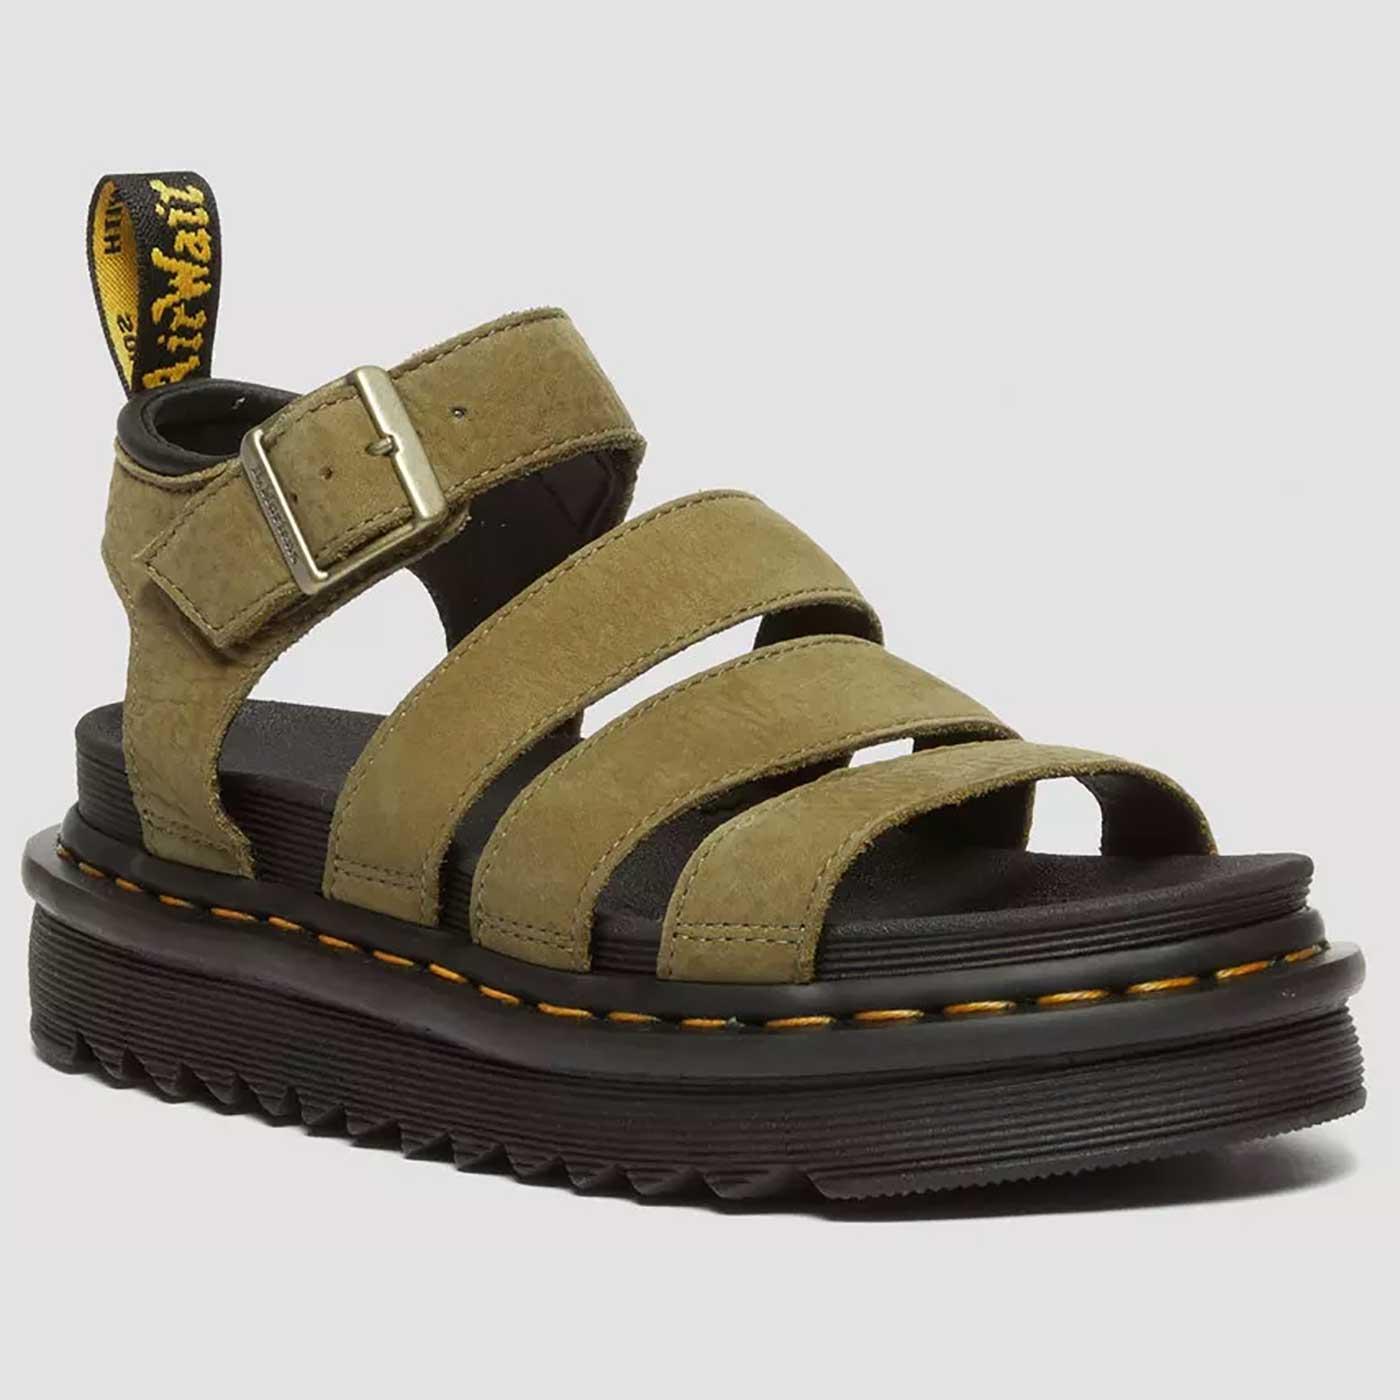 Blaire Dr Martens Tumbled Nubuck Leather Sandals O